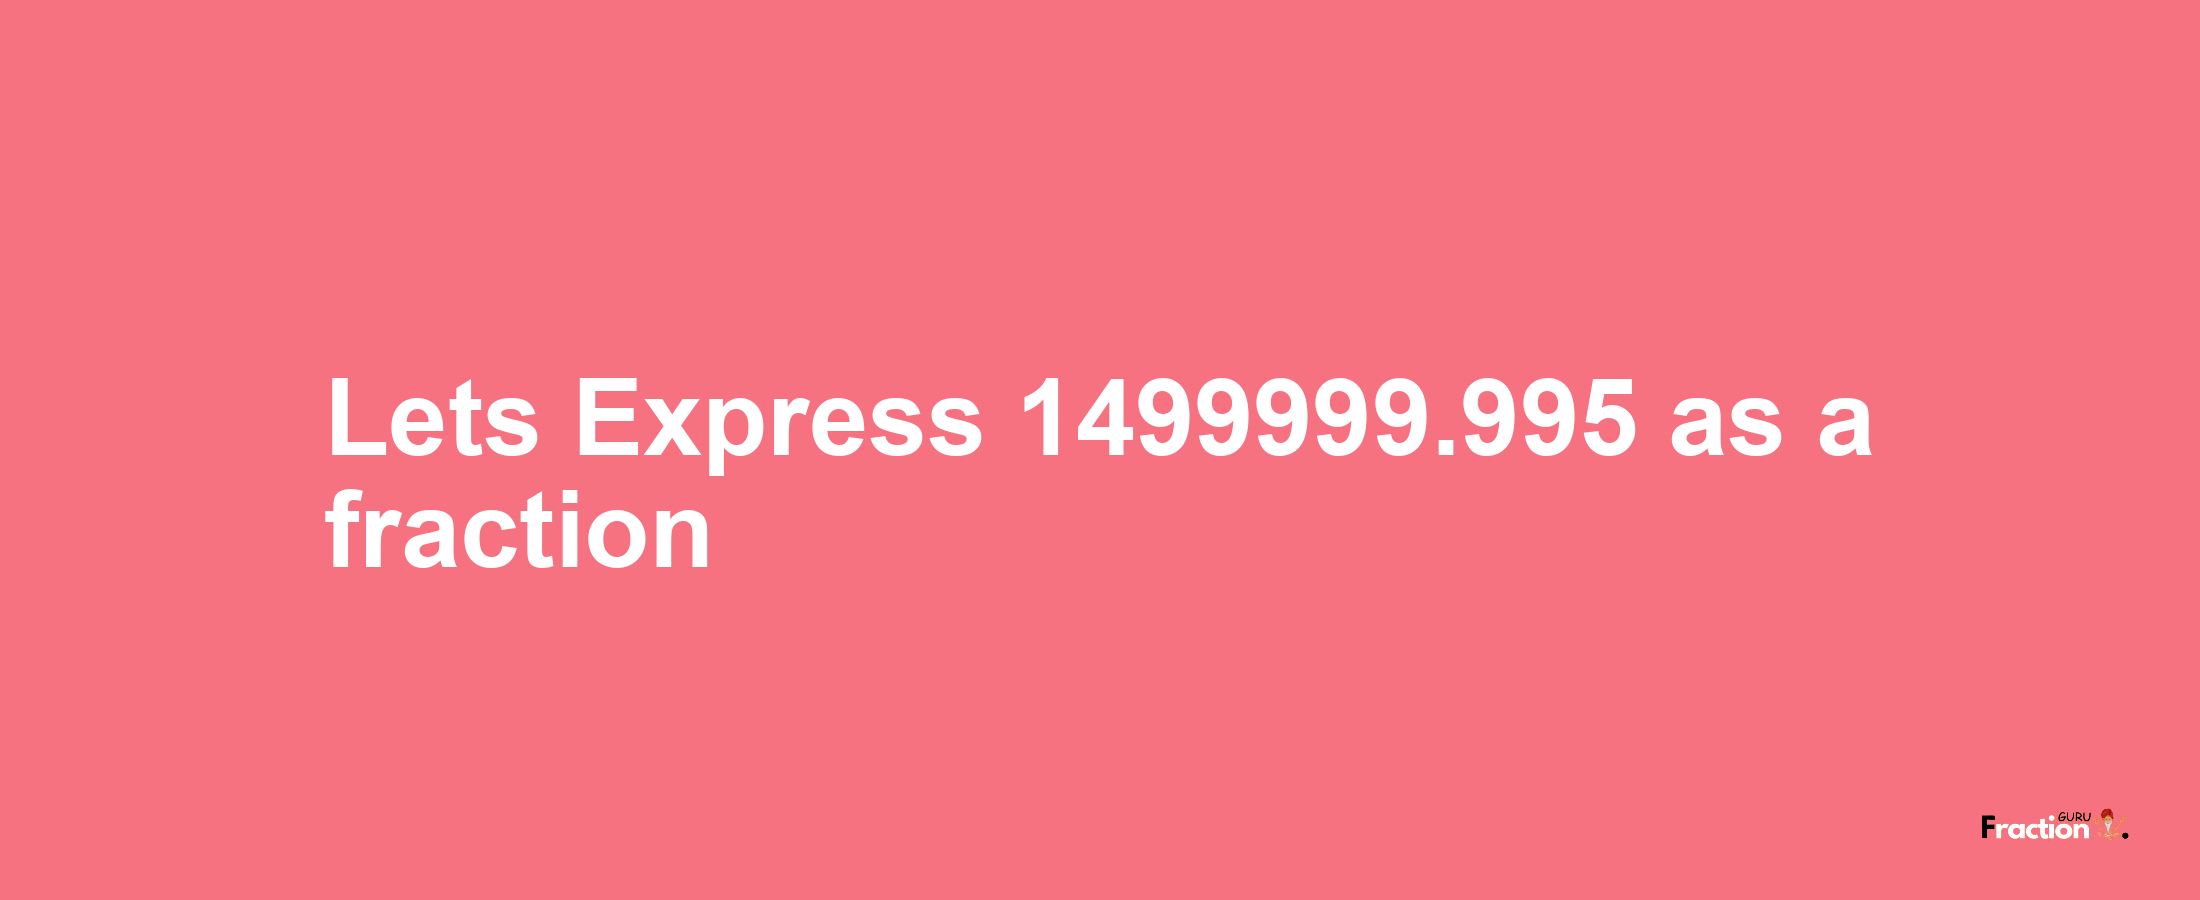 Lets Express 1499999.995 as afraction